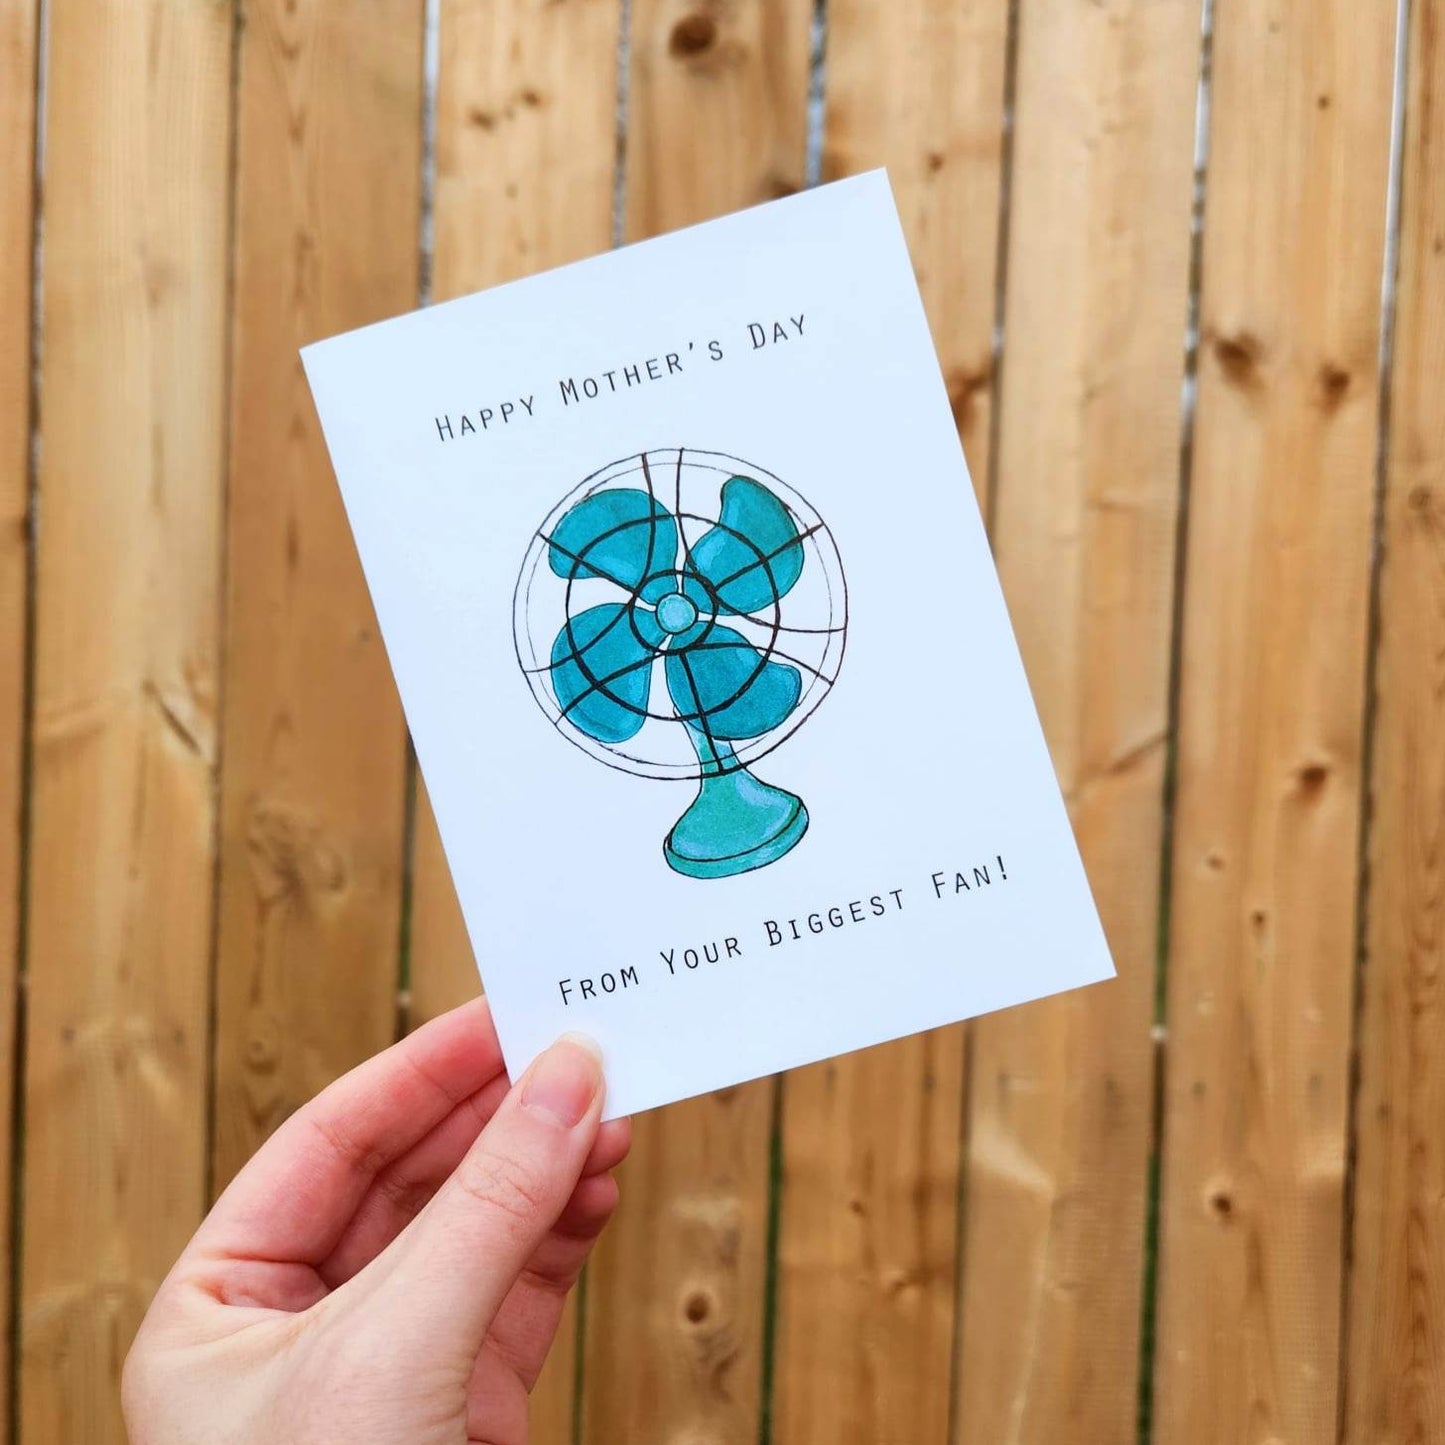 Happy Mother’s Day, From your biggest fan, Funny Mother’s Day card, Card for Mom, I'm your biggest fan, Mother’s Day pun card, Punny card